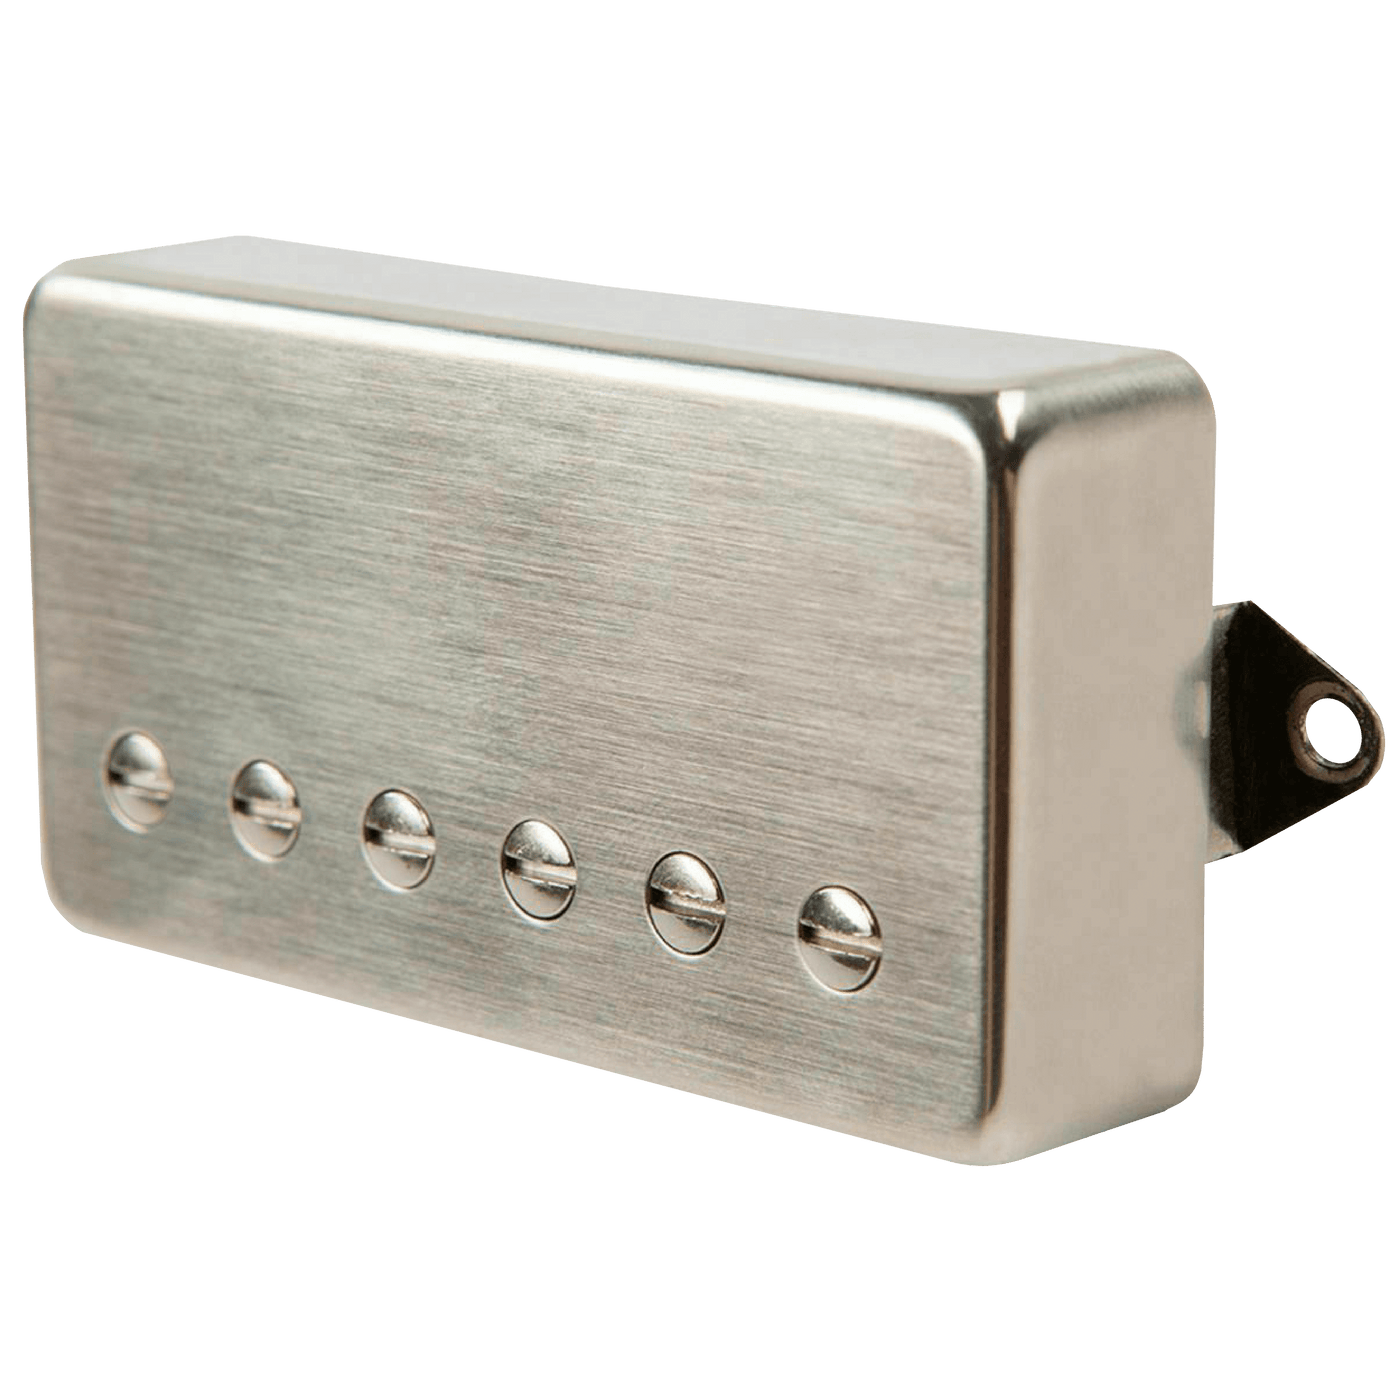 Suhr Thornbucker Plus Signature Humbucker Nickel Chrome (Bridge) - $189990 - Gearhub - “We are happy to introduce the new Thornbucker + bridge pickup. It retains all the clarity, warmth, character, and mojo of the original Thornbuckers, and adds a bit more power and oomph. Great for players that like a slightly overwound PAF-type tone!”. “We’re overjoyed with the enthusiasm from players for the Thornbucker humbucking pickups! The pickups have been a resounding success, garnering praise for their extraordina